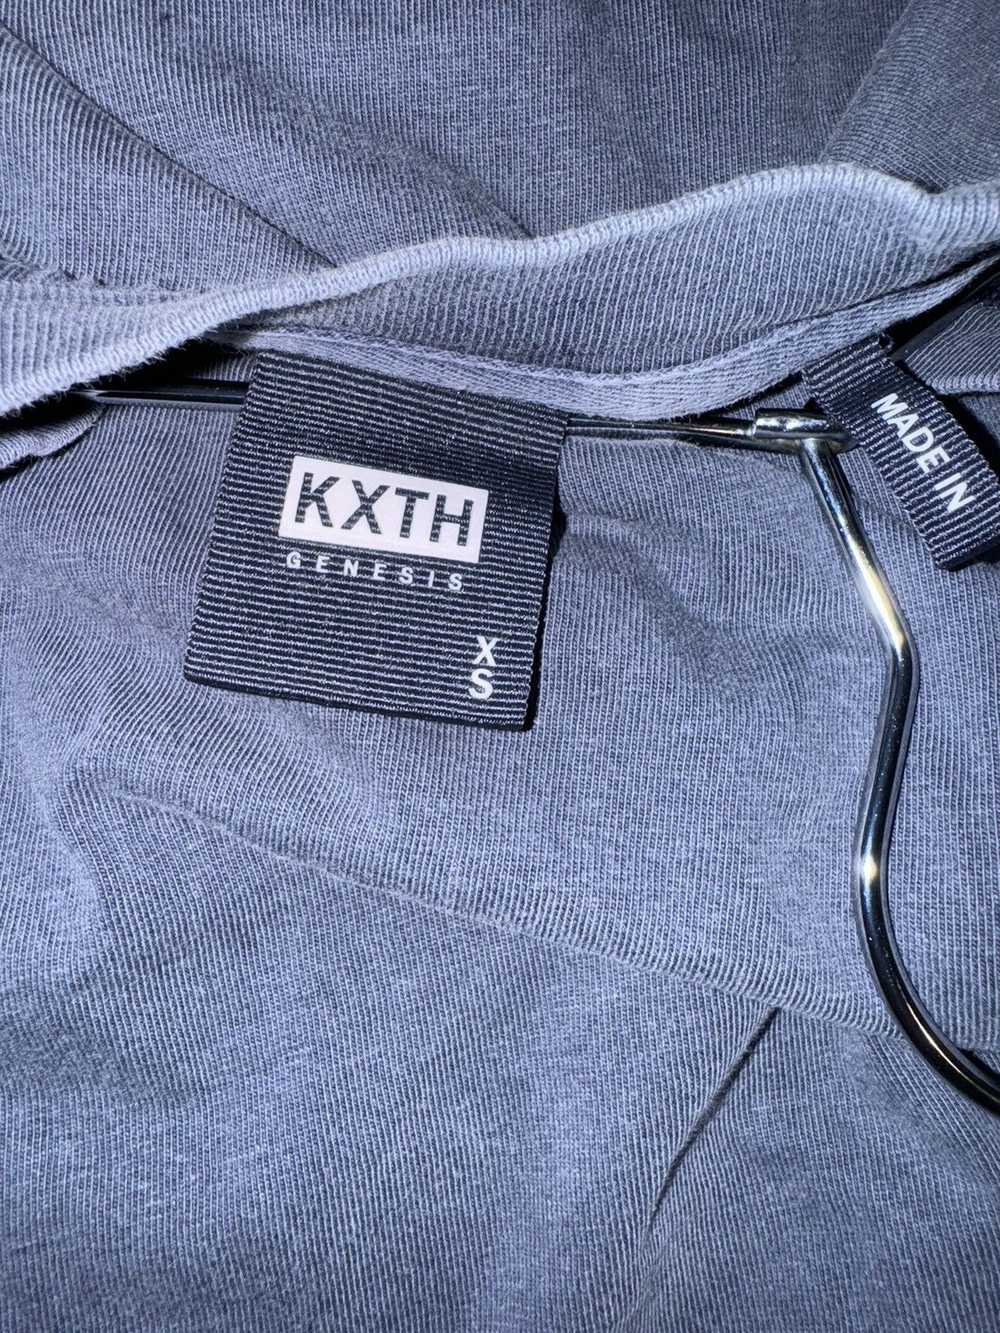 Hype × Kith × Streetwear Kith x Russell long slee… - image 4